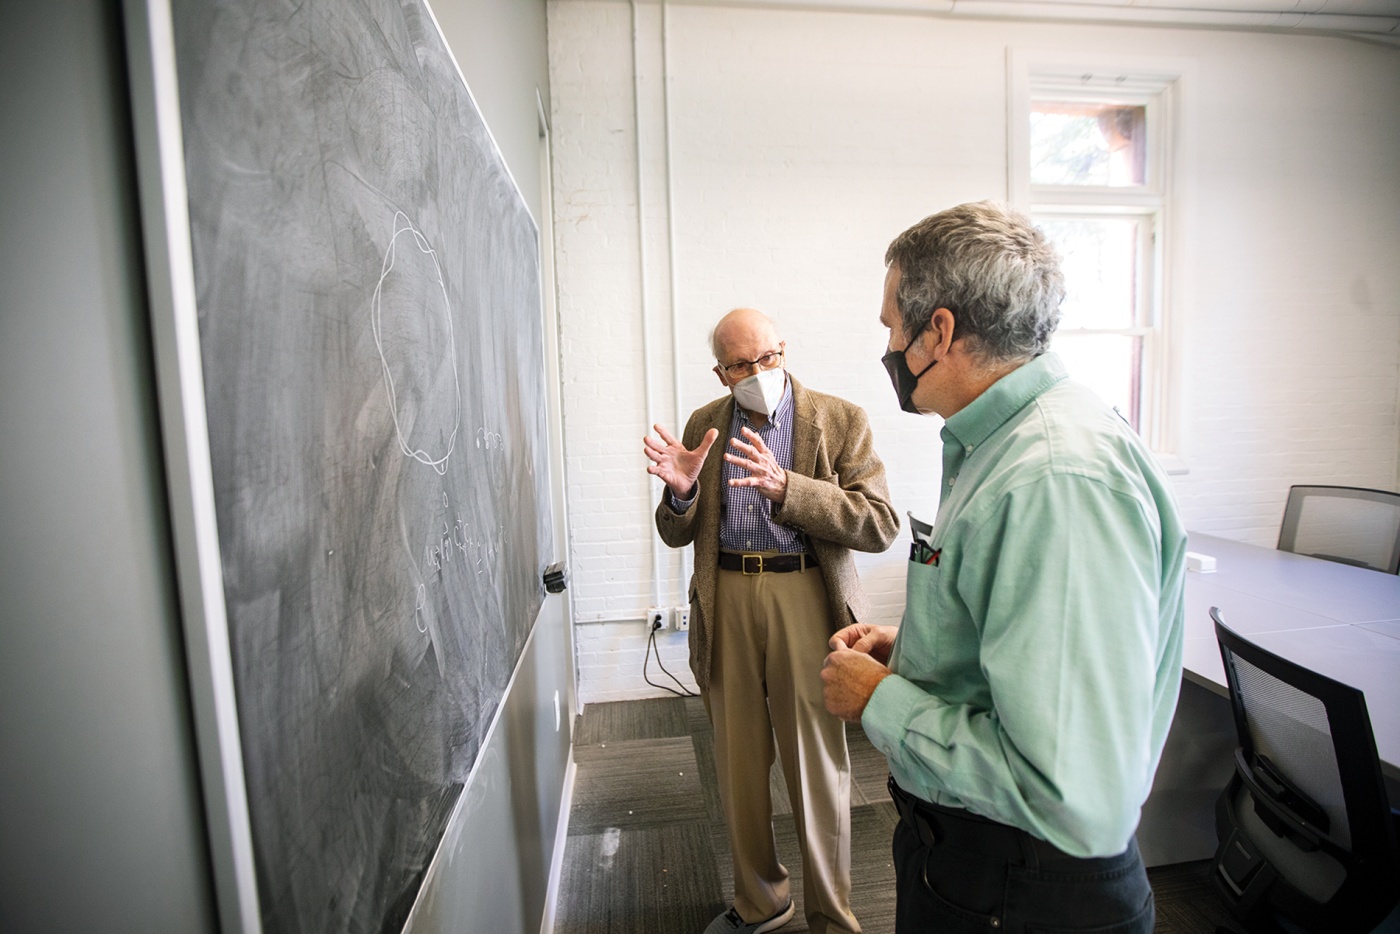 Manfred Steiner, now 90, works on a problem at the Barus and Holley Building with Professor of Physics Brad Marston.